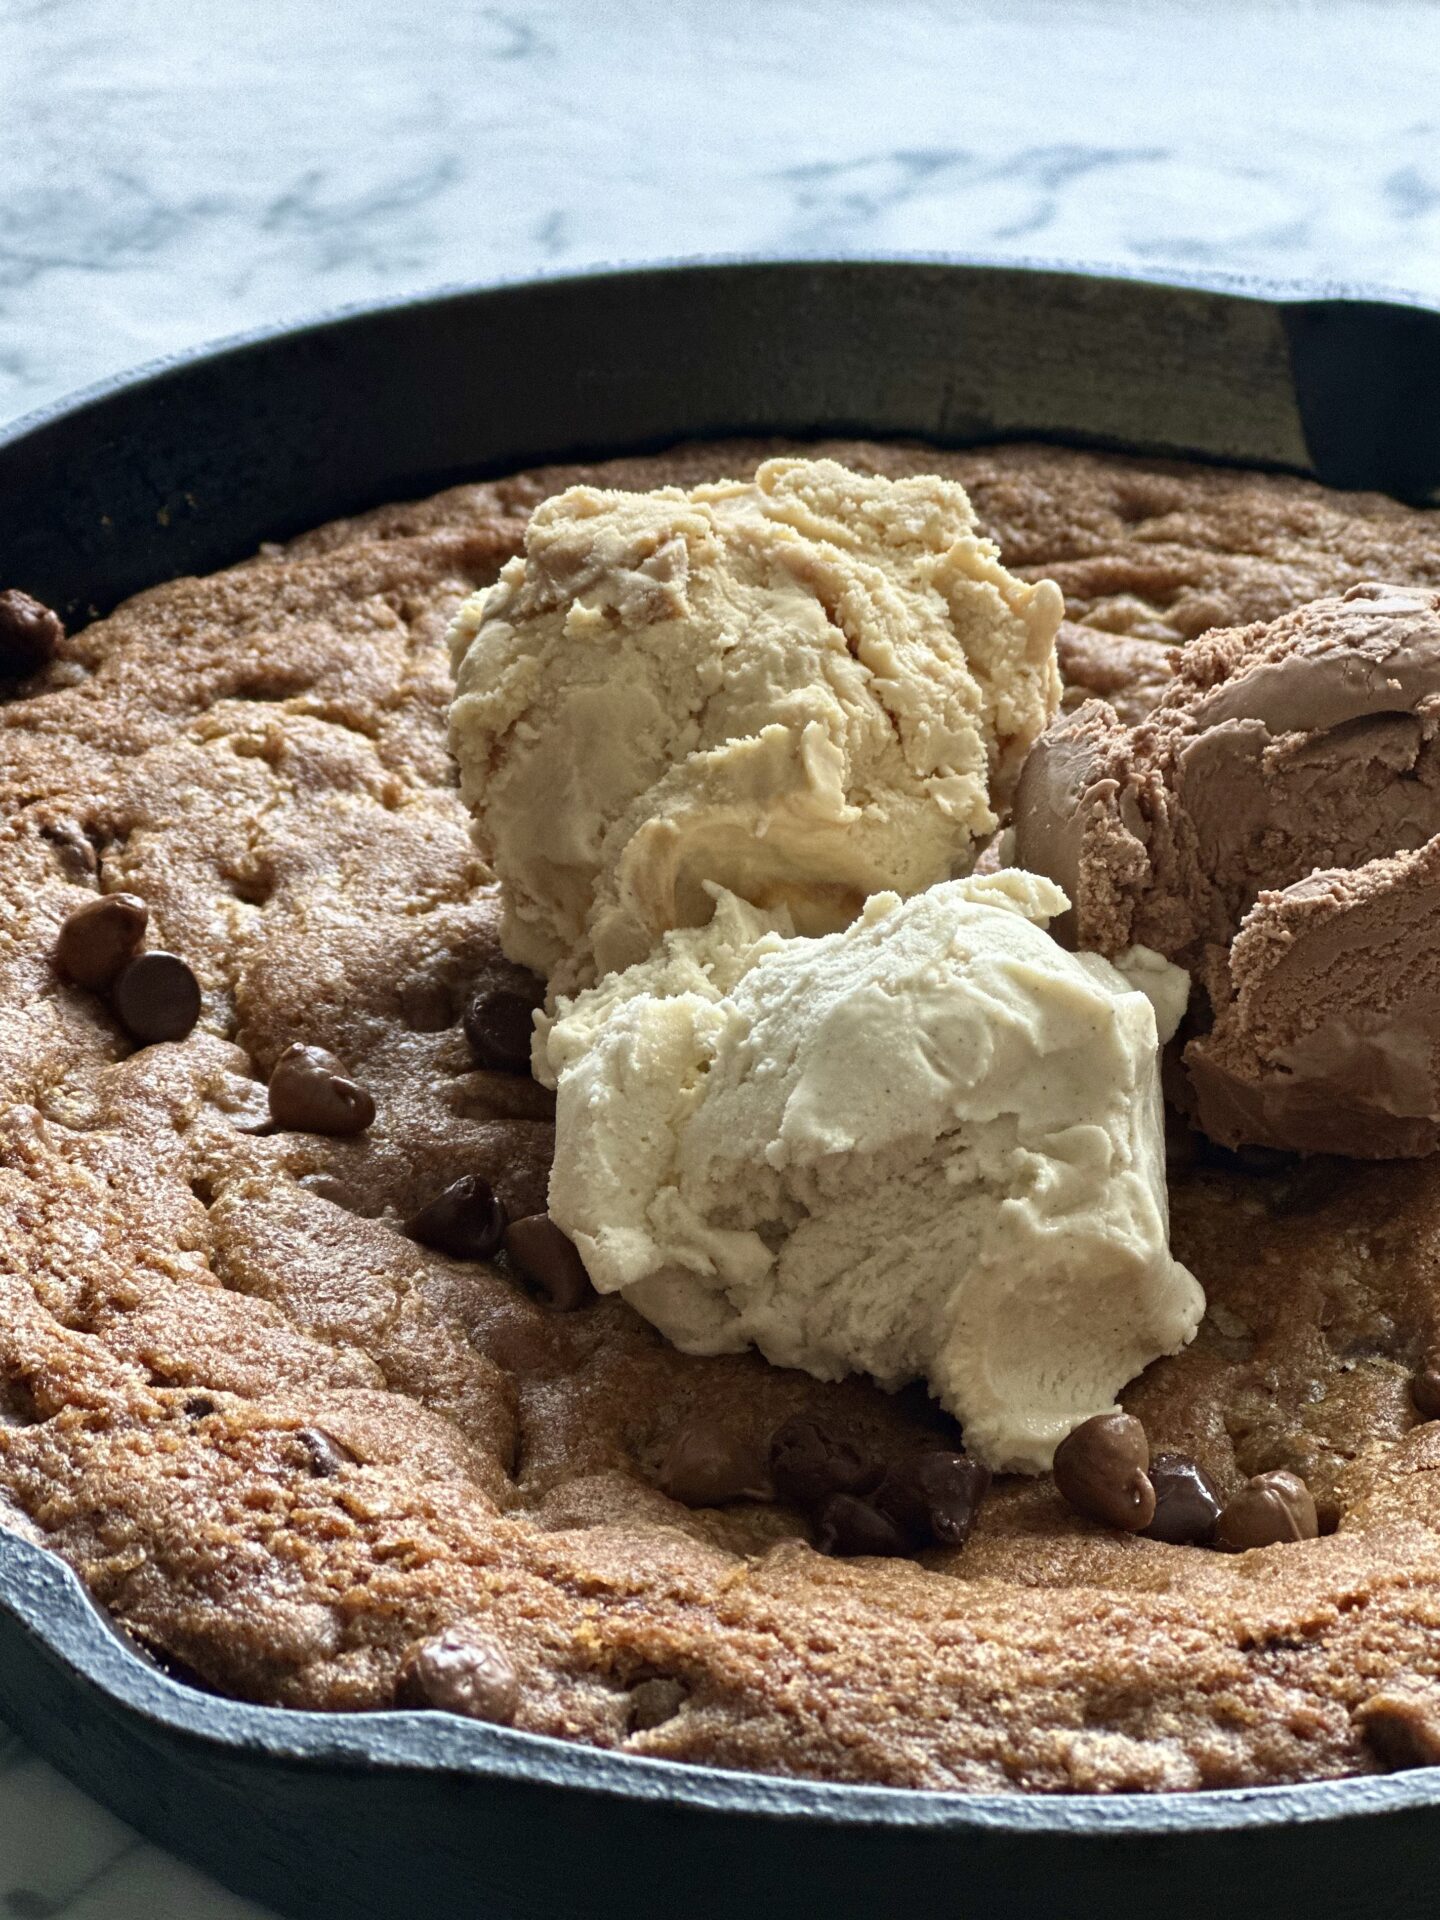 Cast iron pan full of a giant chocolate chip cookie, topped with scoops of vanilla, chocolate and caramel ice cream